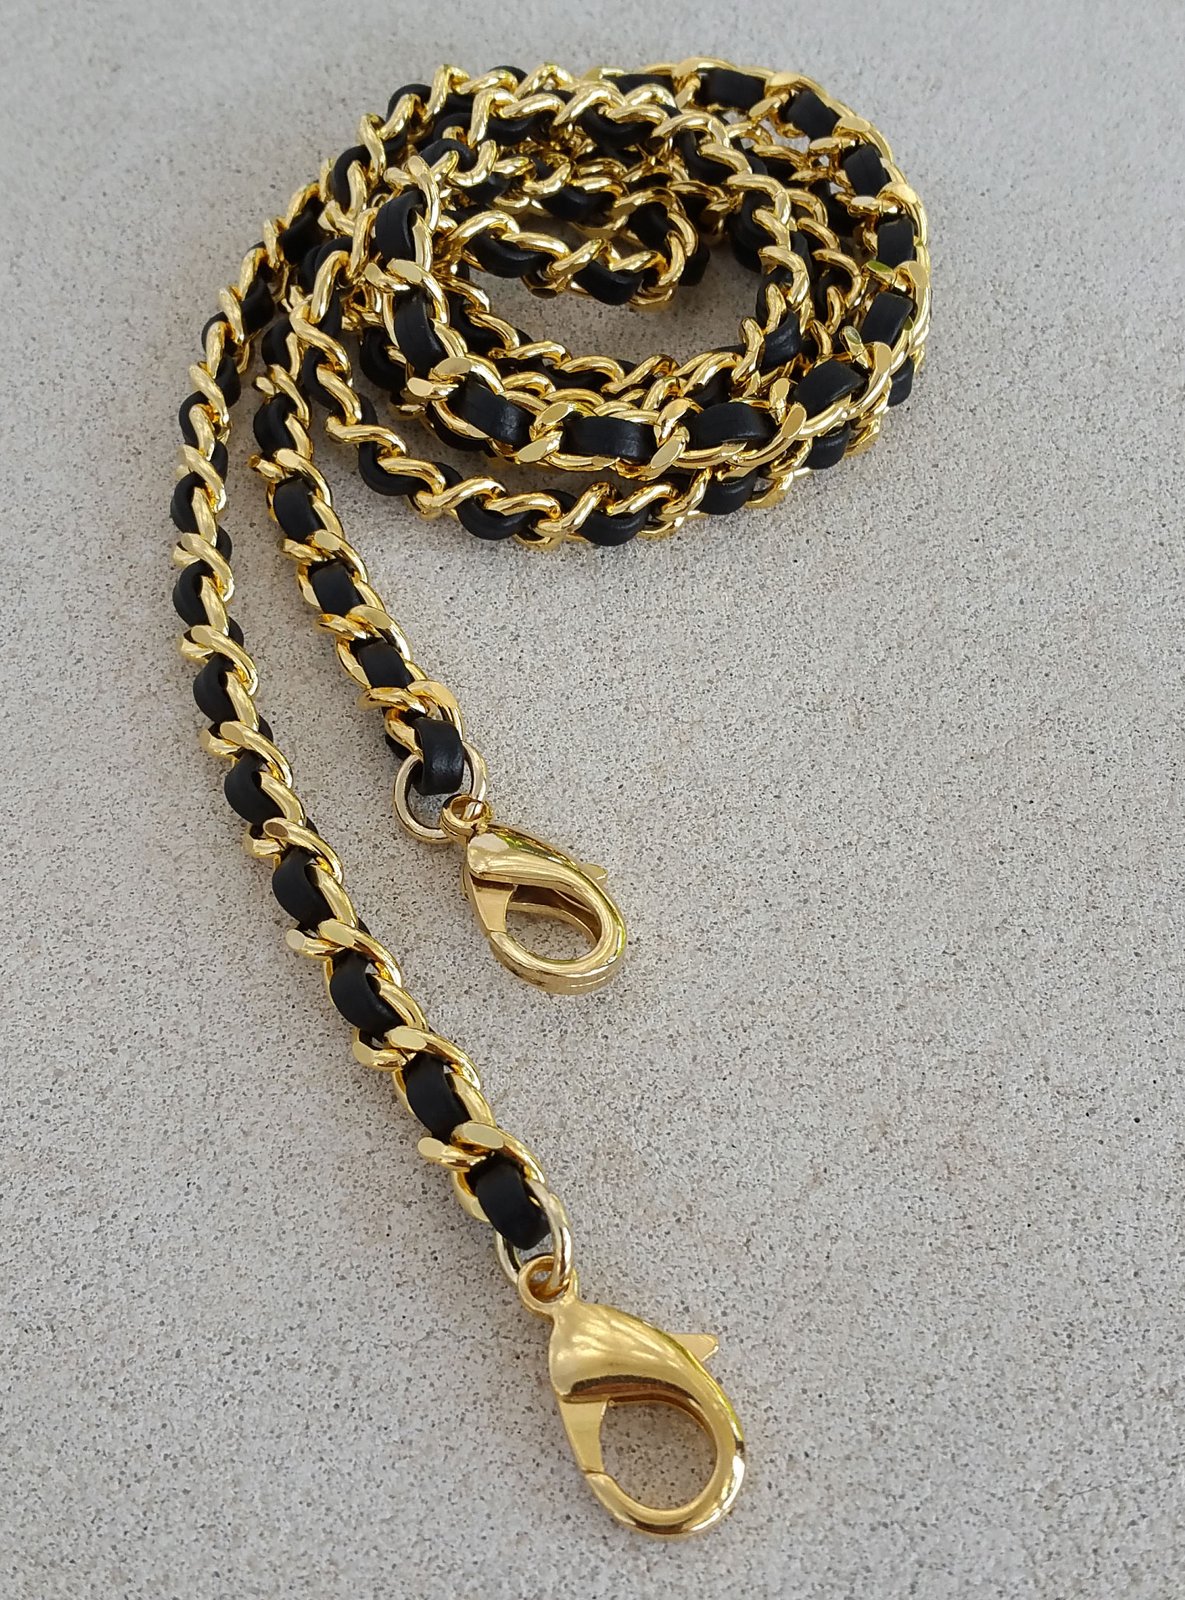 Extra Petite GOLD Chain Strap with Leather Weave - Mini Classy Curb Diamond Cut - Choose Option ...